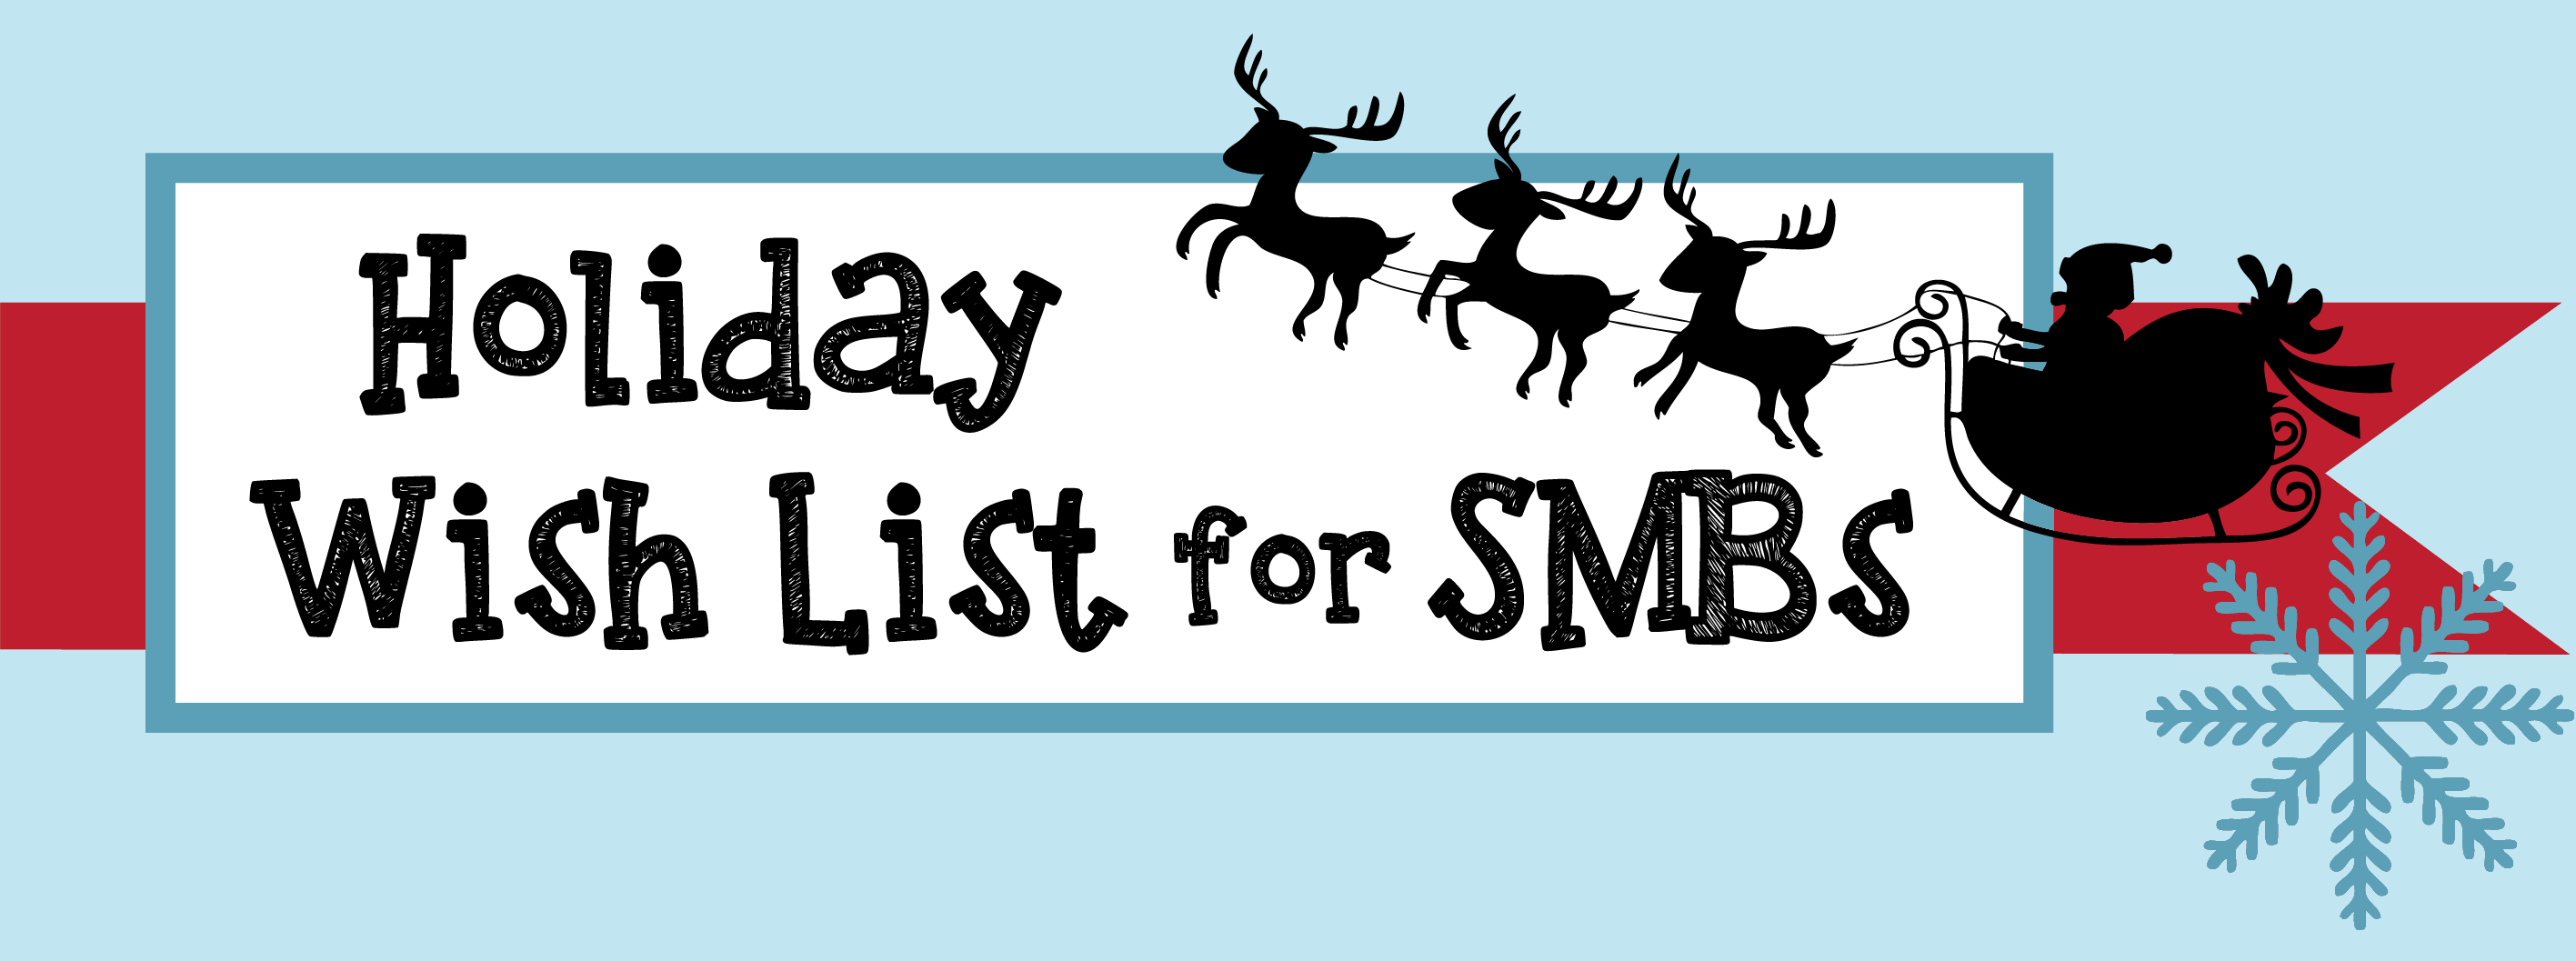 SMBs 2016 Holiday Wish List Infographic Header 680×680 For Blog 01